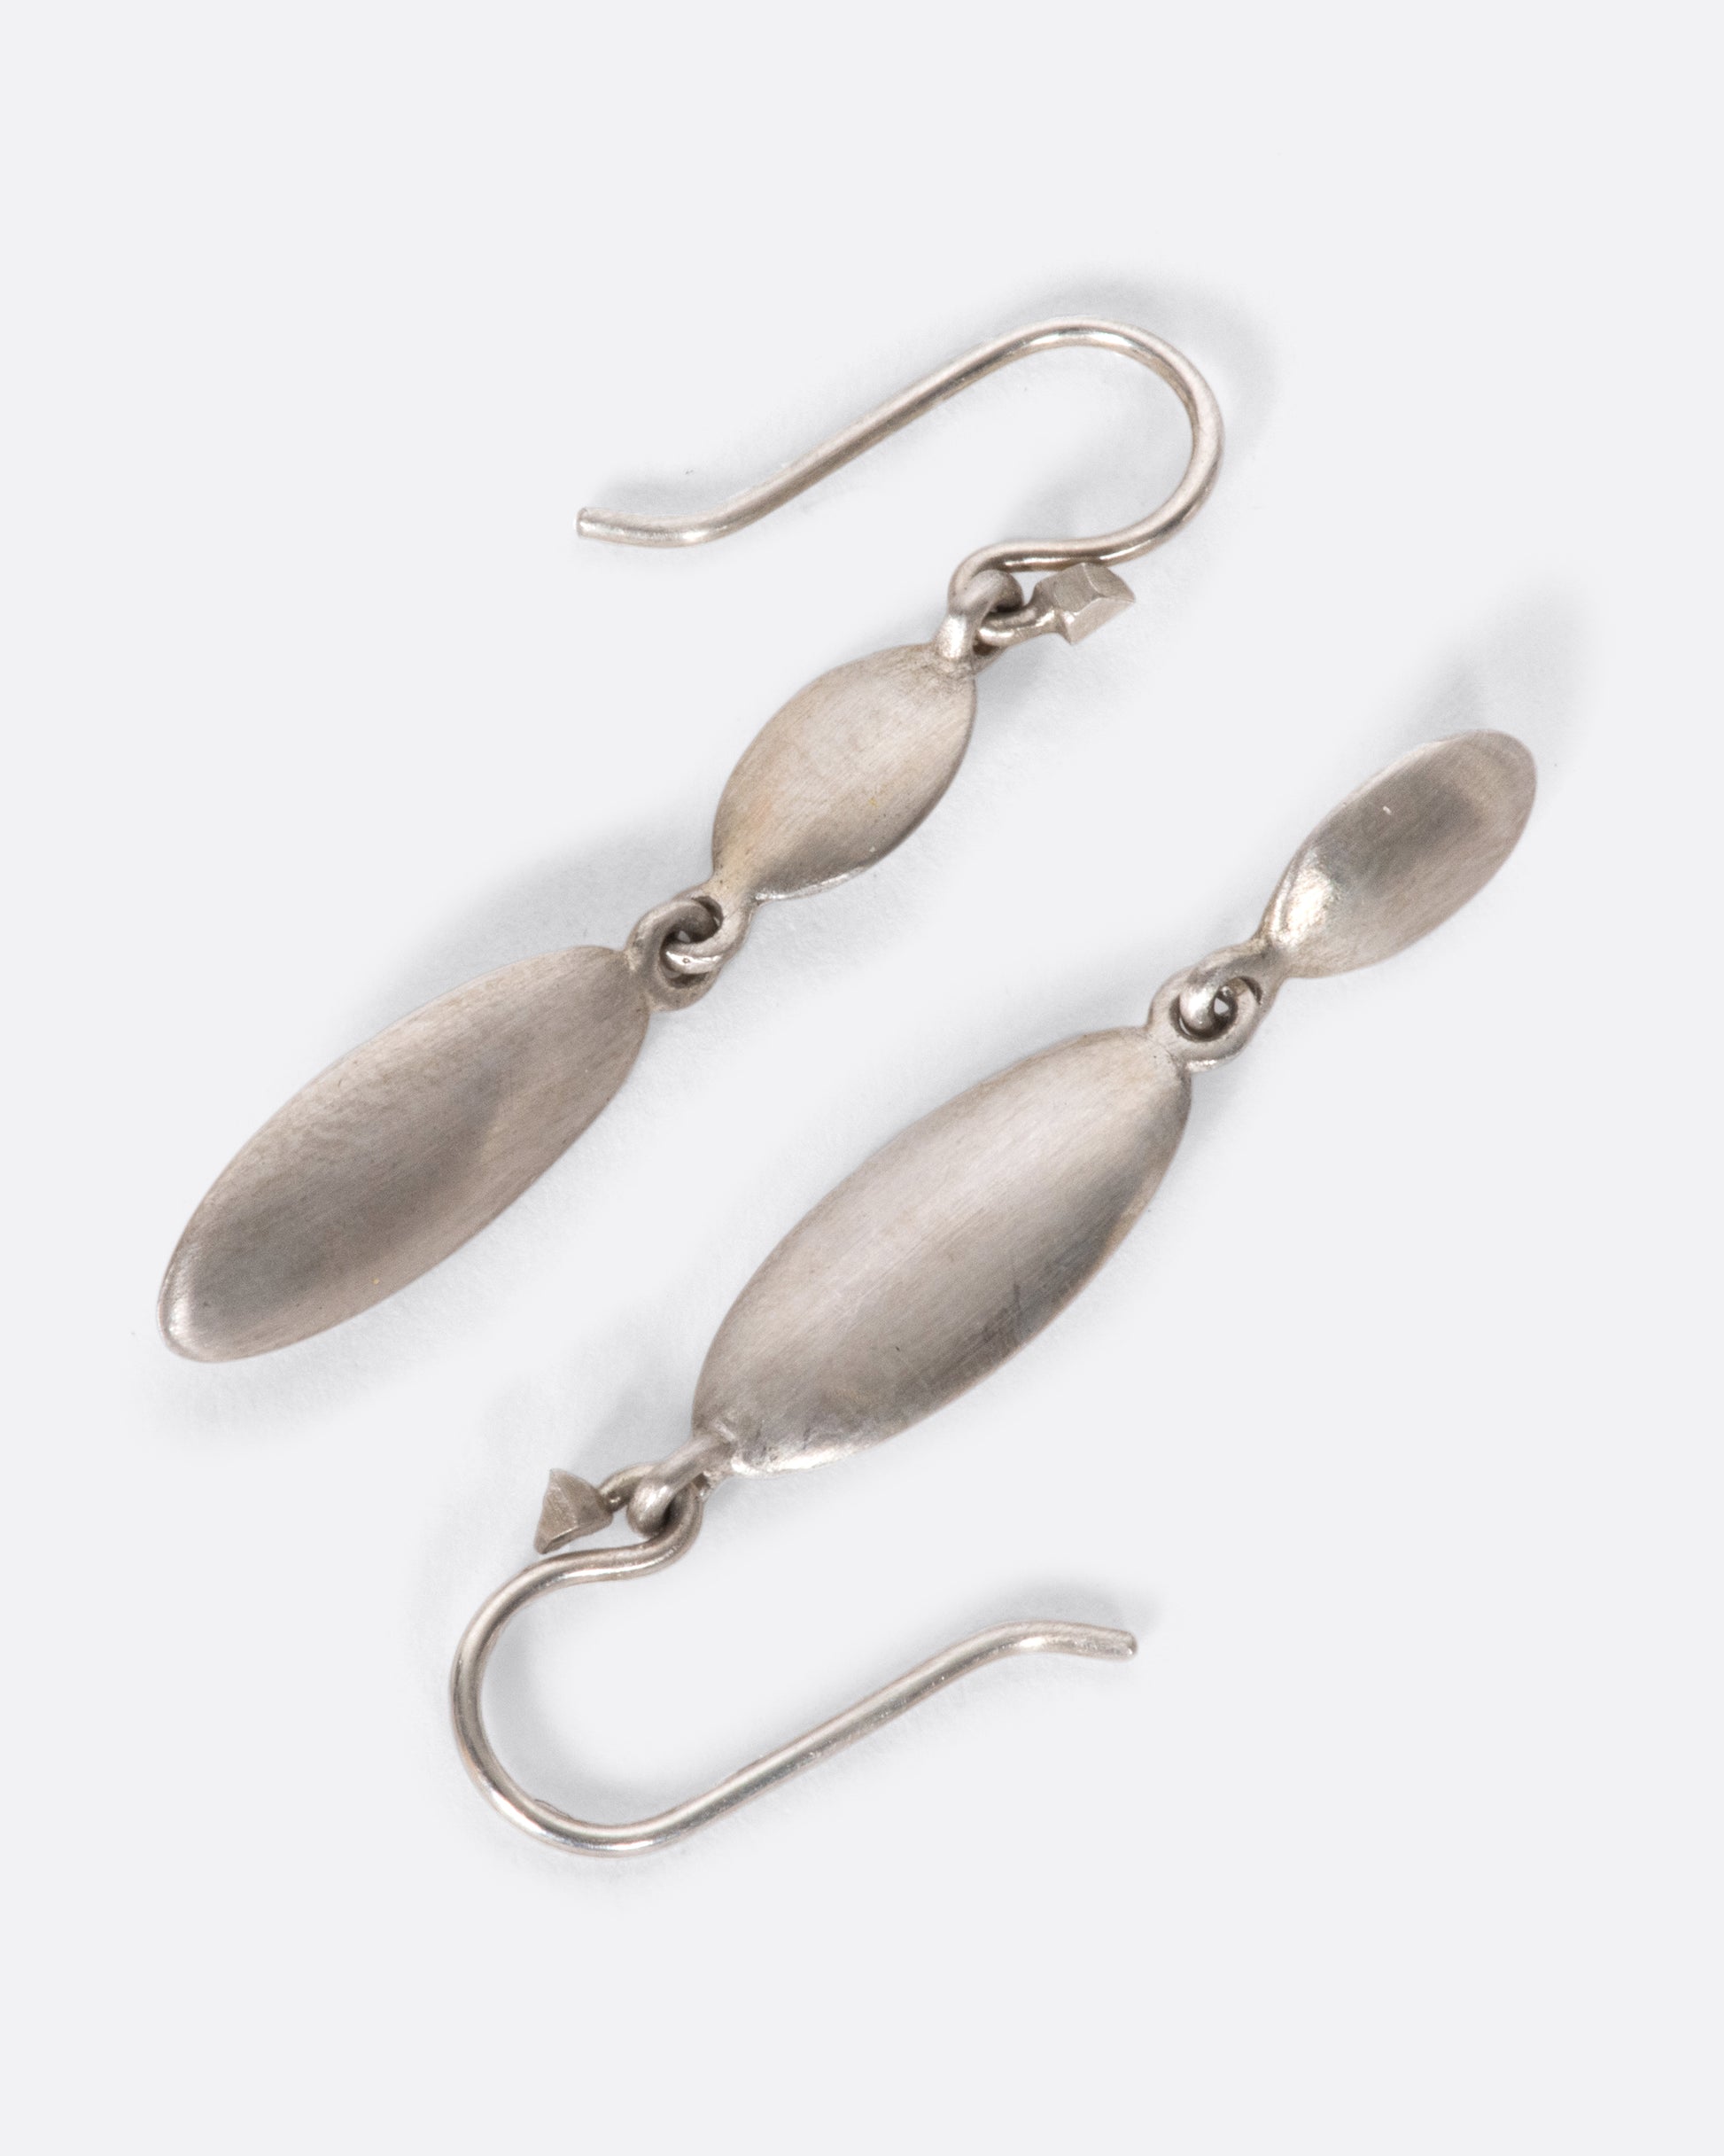 These asymmetrical dangles juxtapose a flat circle with a razor-thin oval in a luscious matte finish